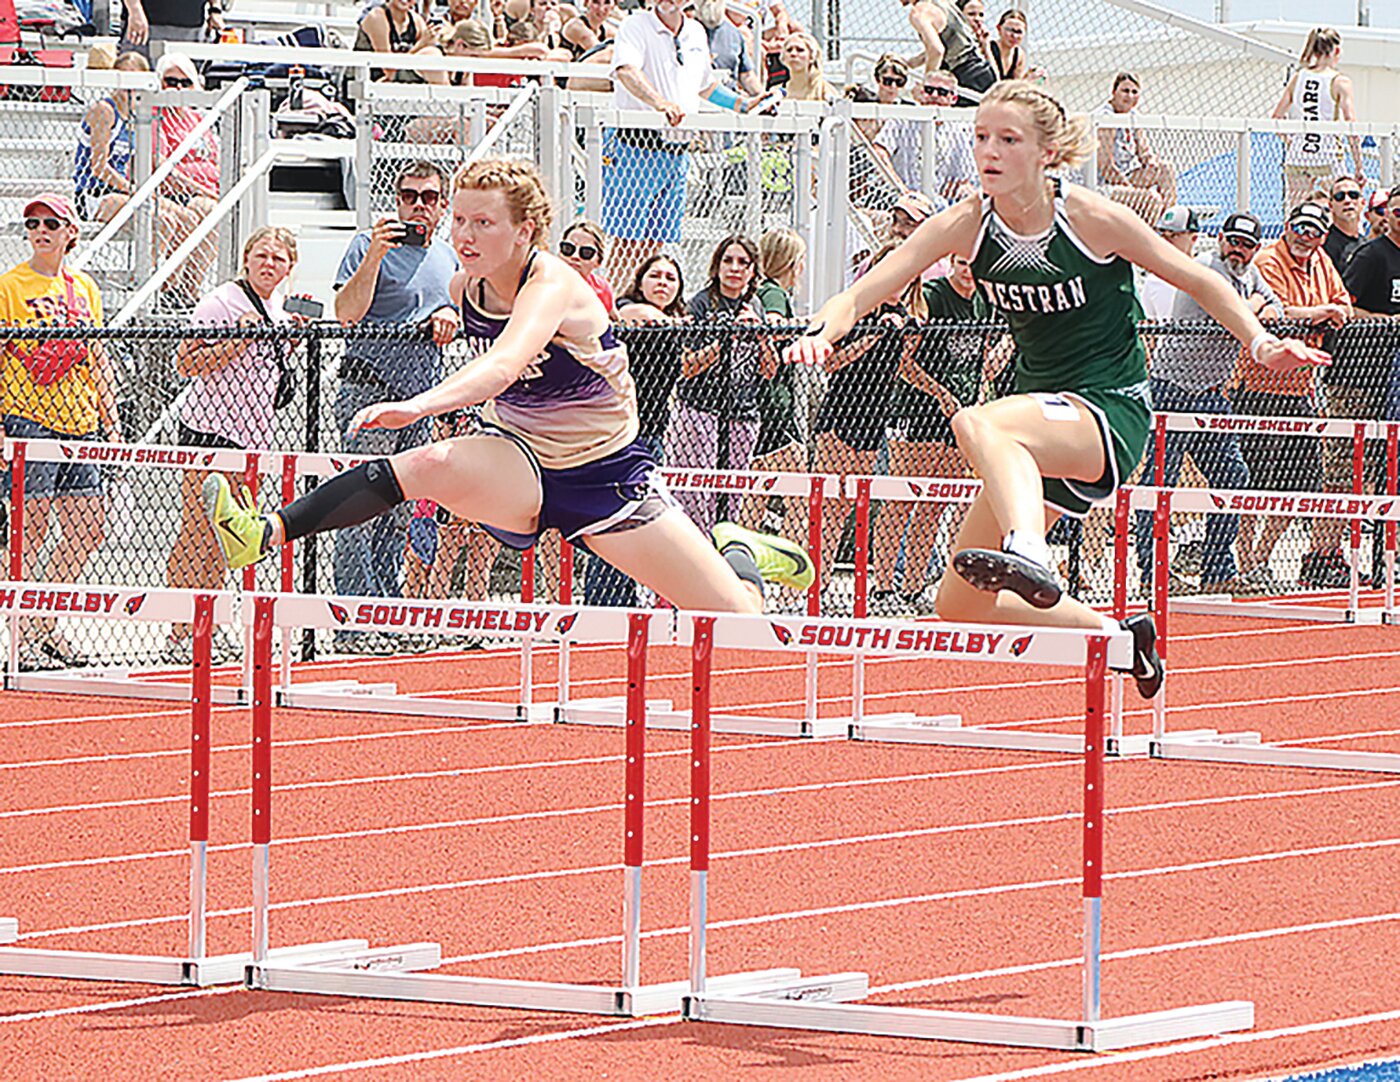 Salisbury's Kate Kottman (left) and Emma Wortmann clear a hurdle during the Class 2 sectional meet at Shelbina on Saturday, May 13.